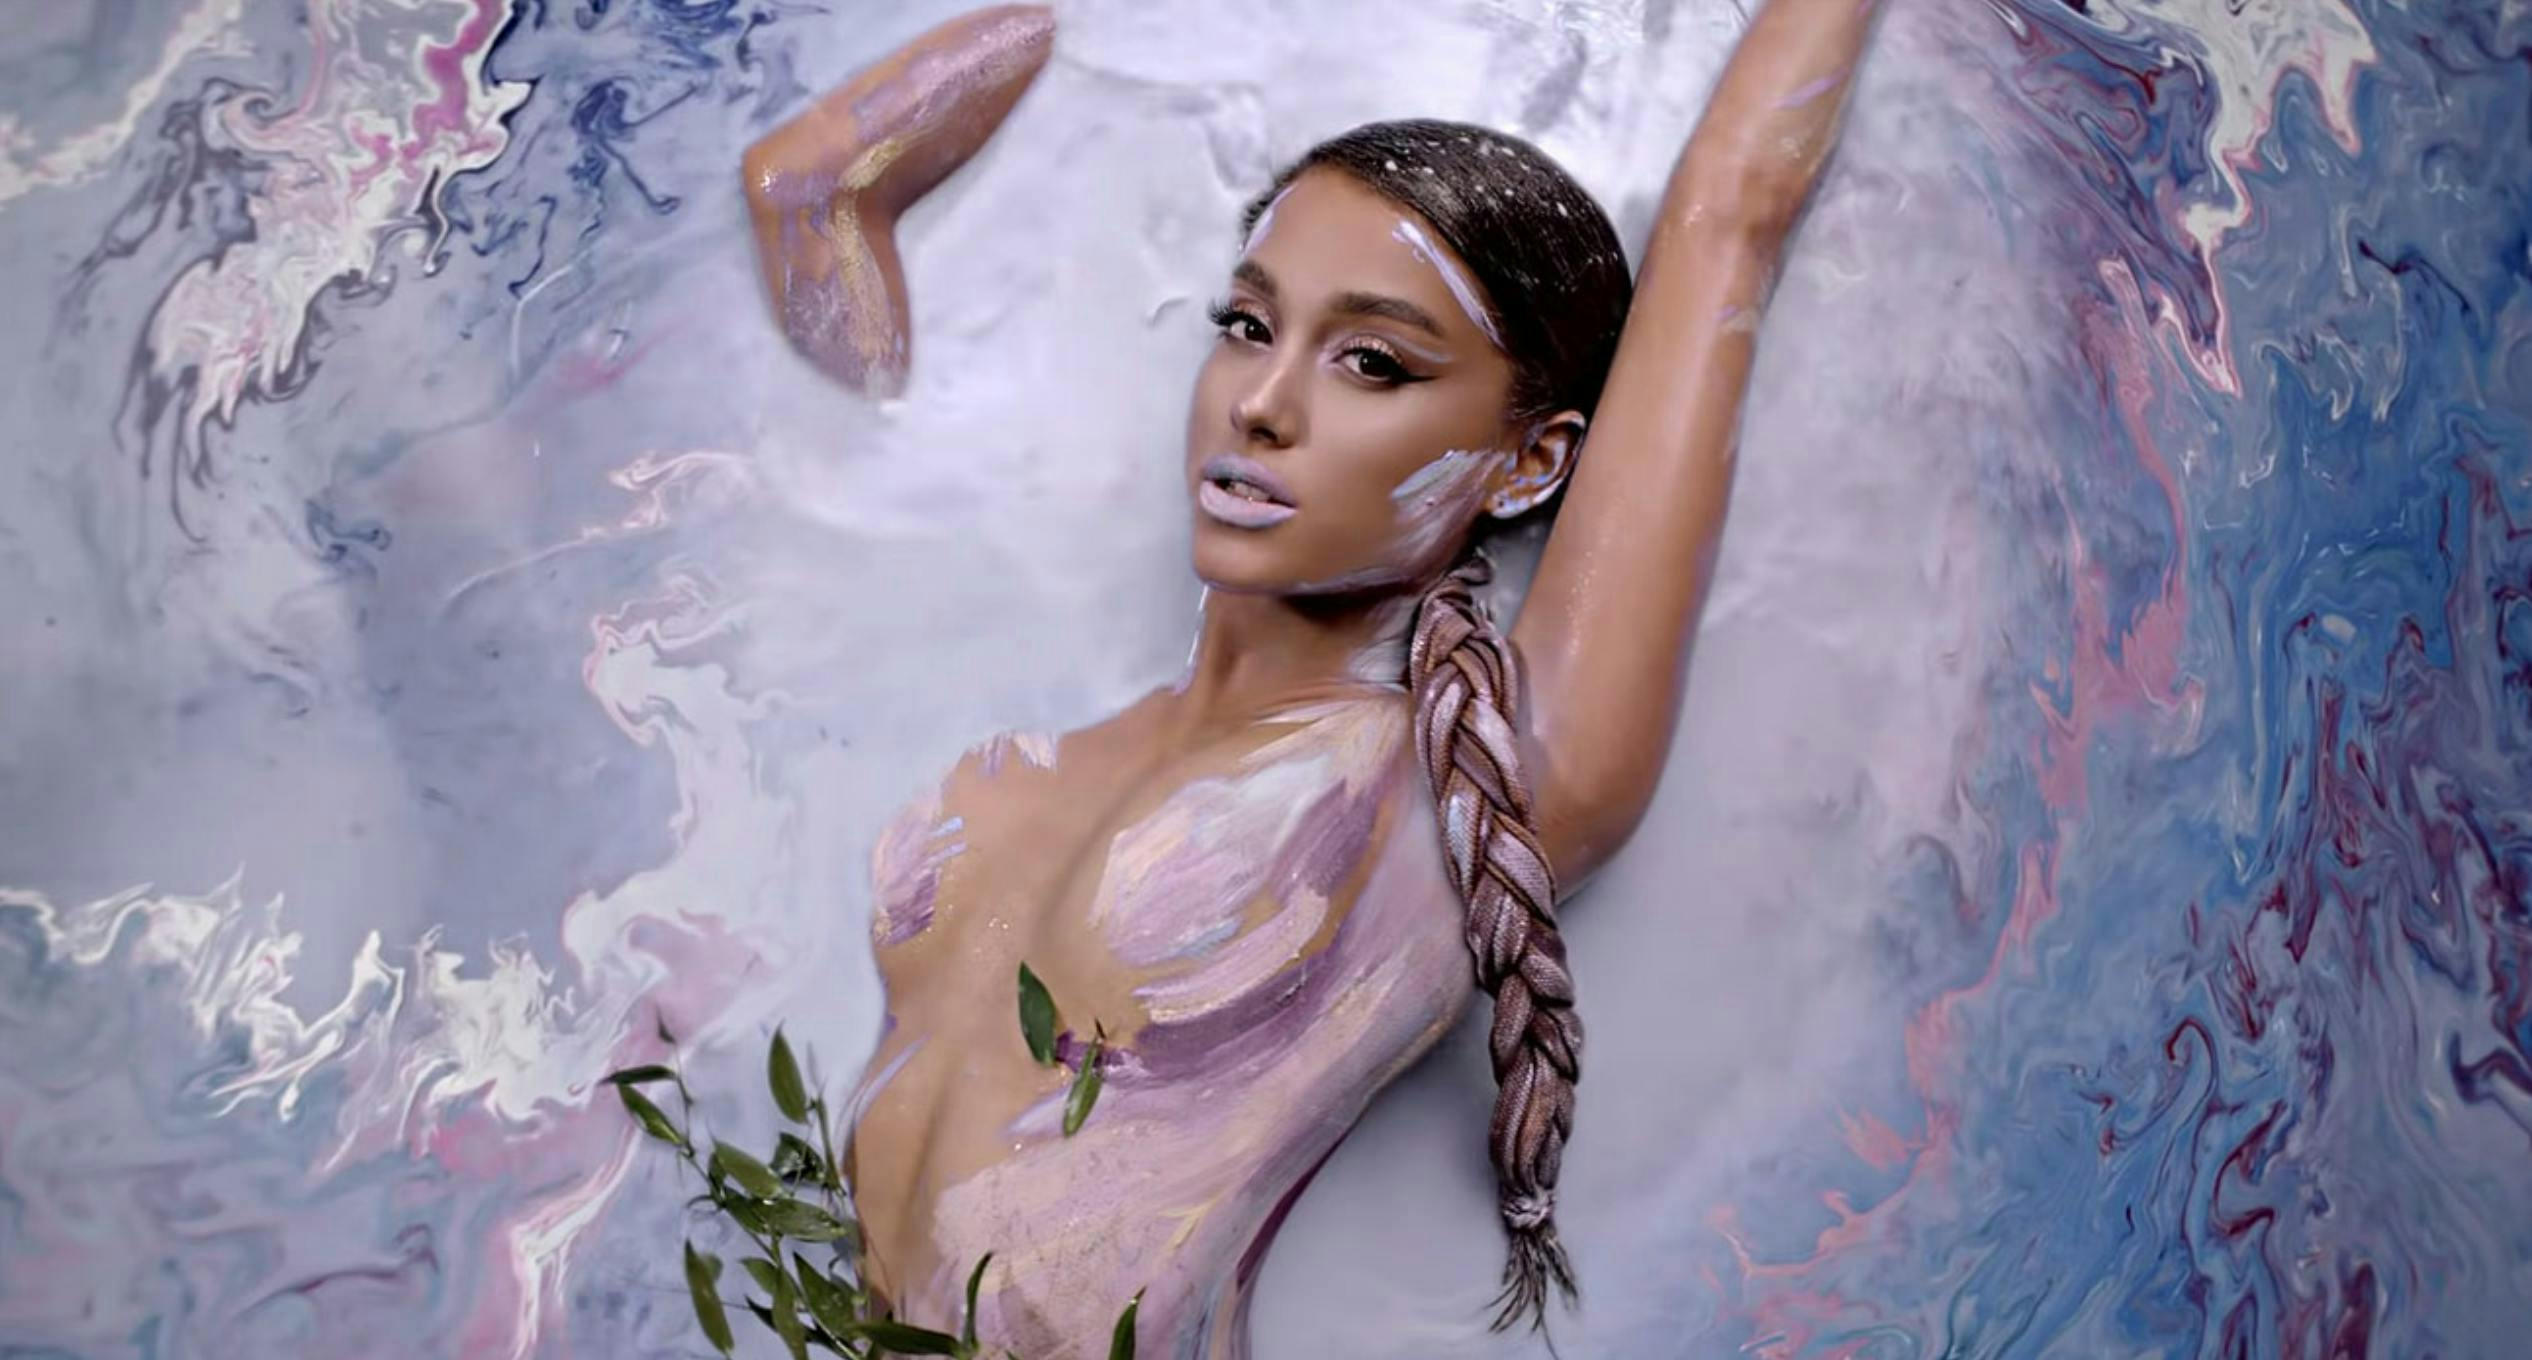 Ariana Grande in pink and blue paint.